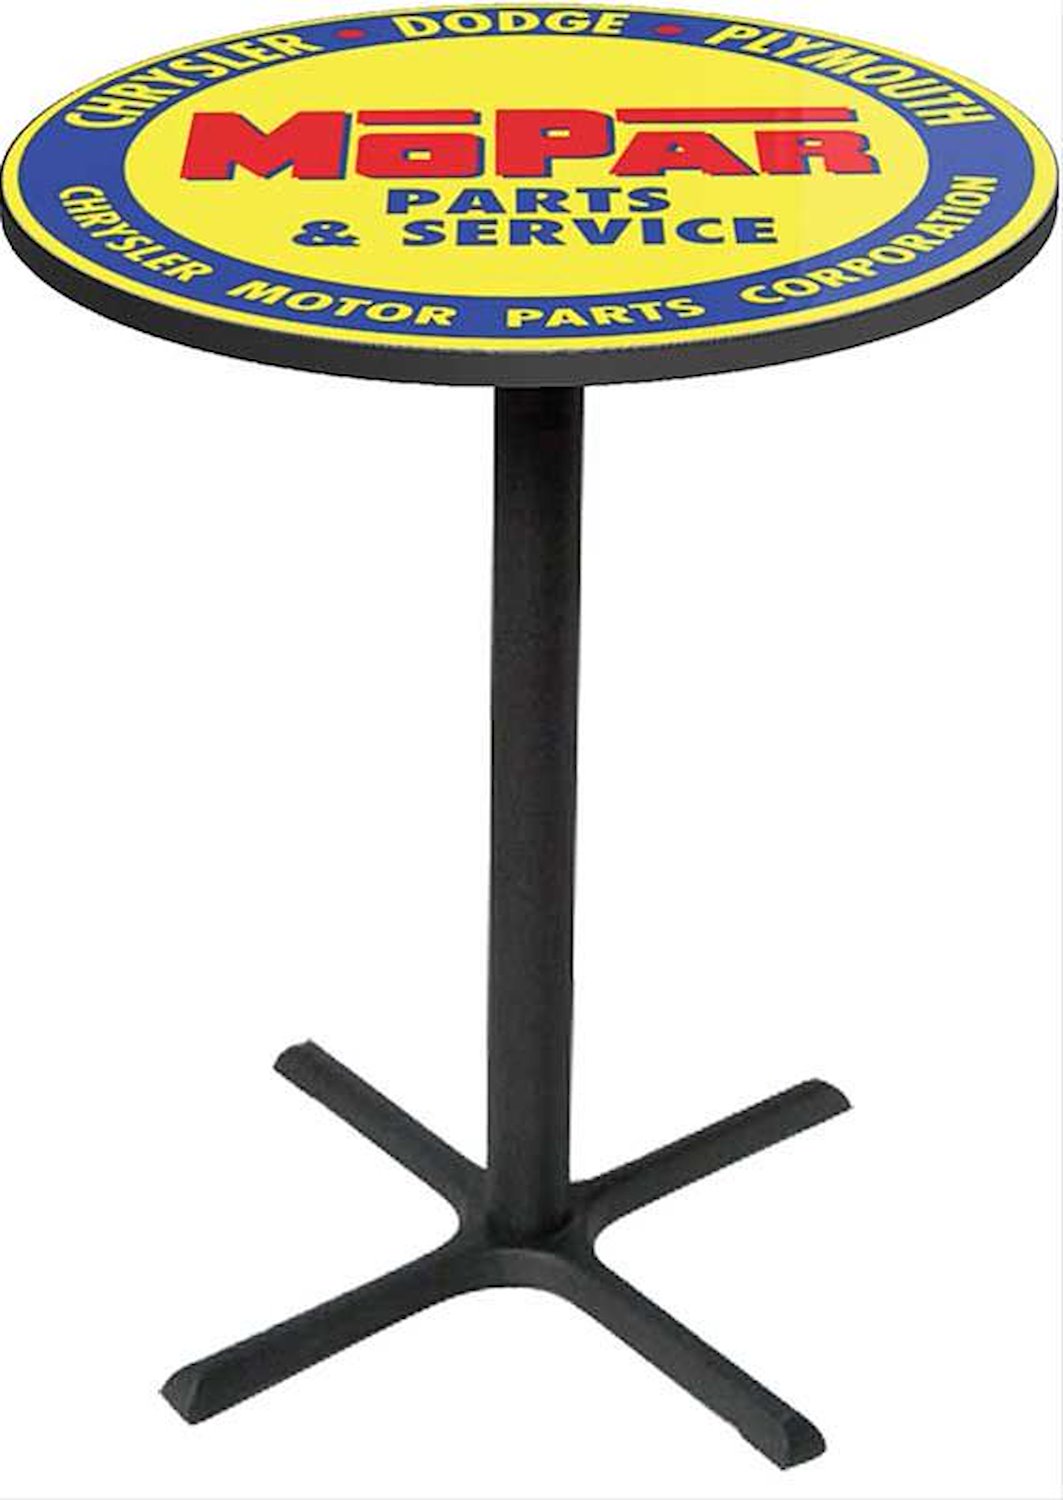 MD671104 Pub Table With Black Base 1948-53 Style Mopar Blue/Yellow parts And Accessories Logo